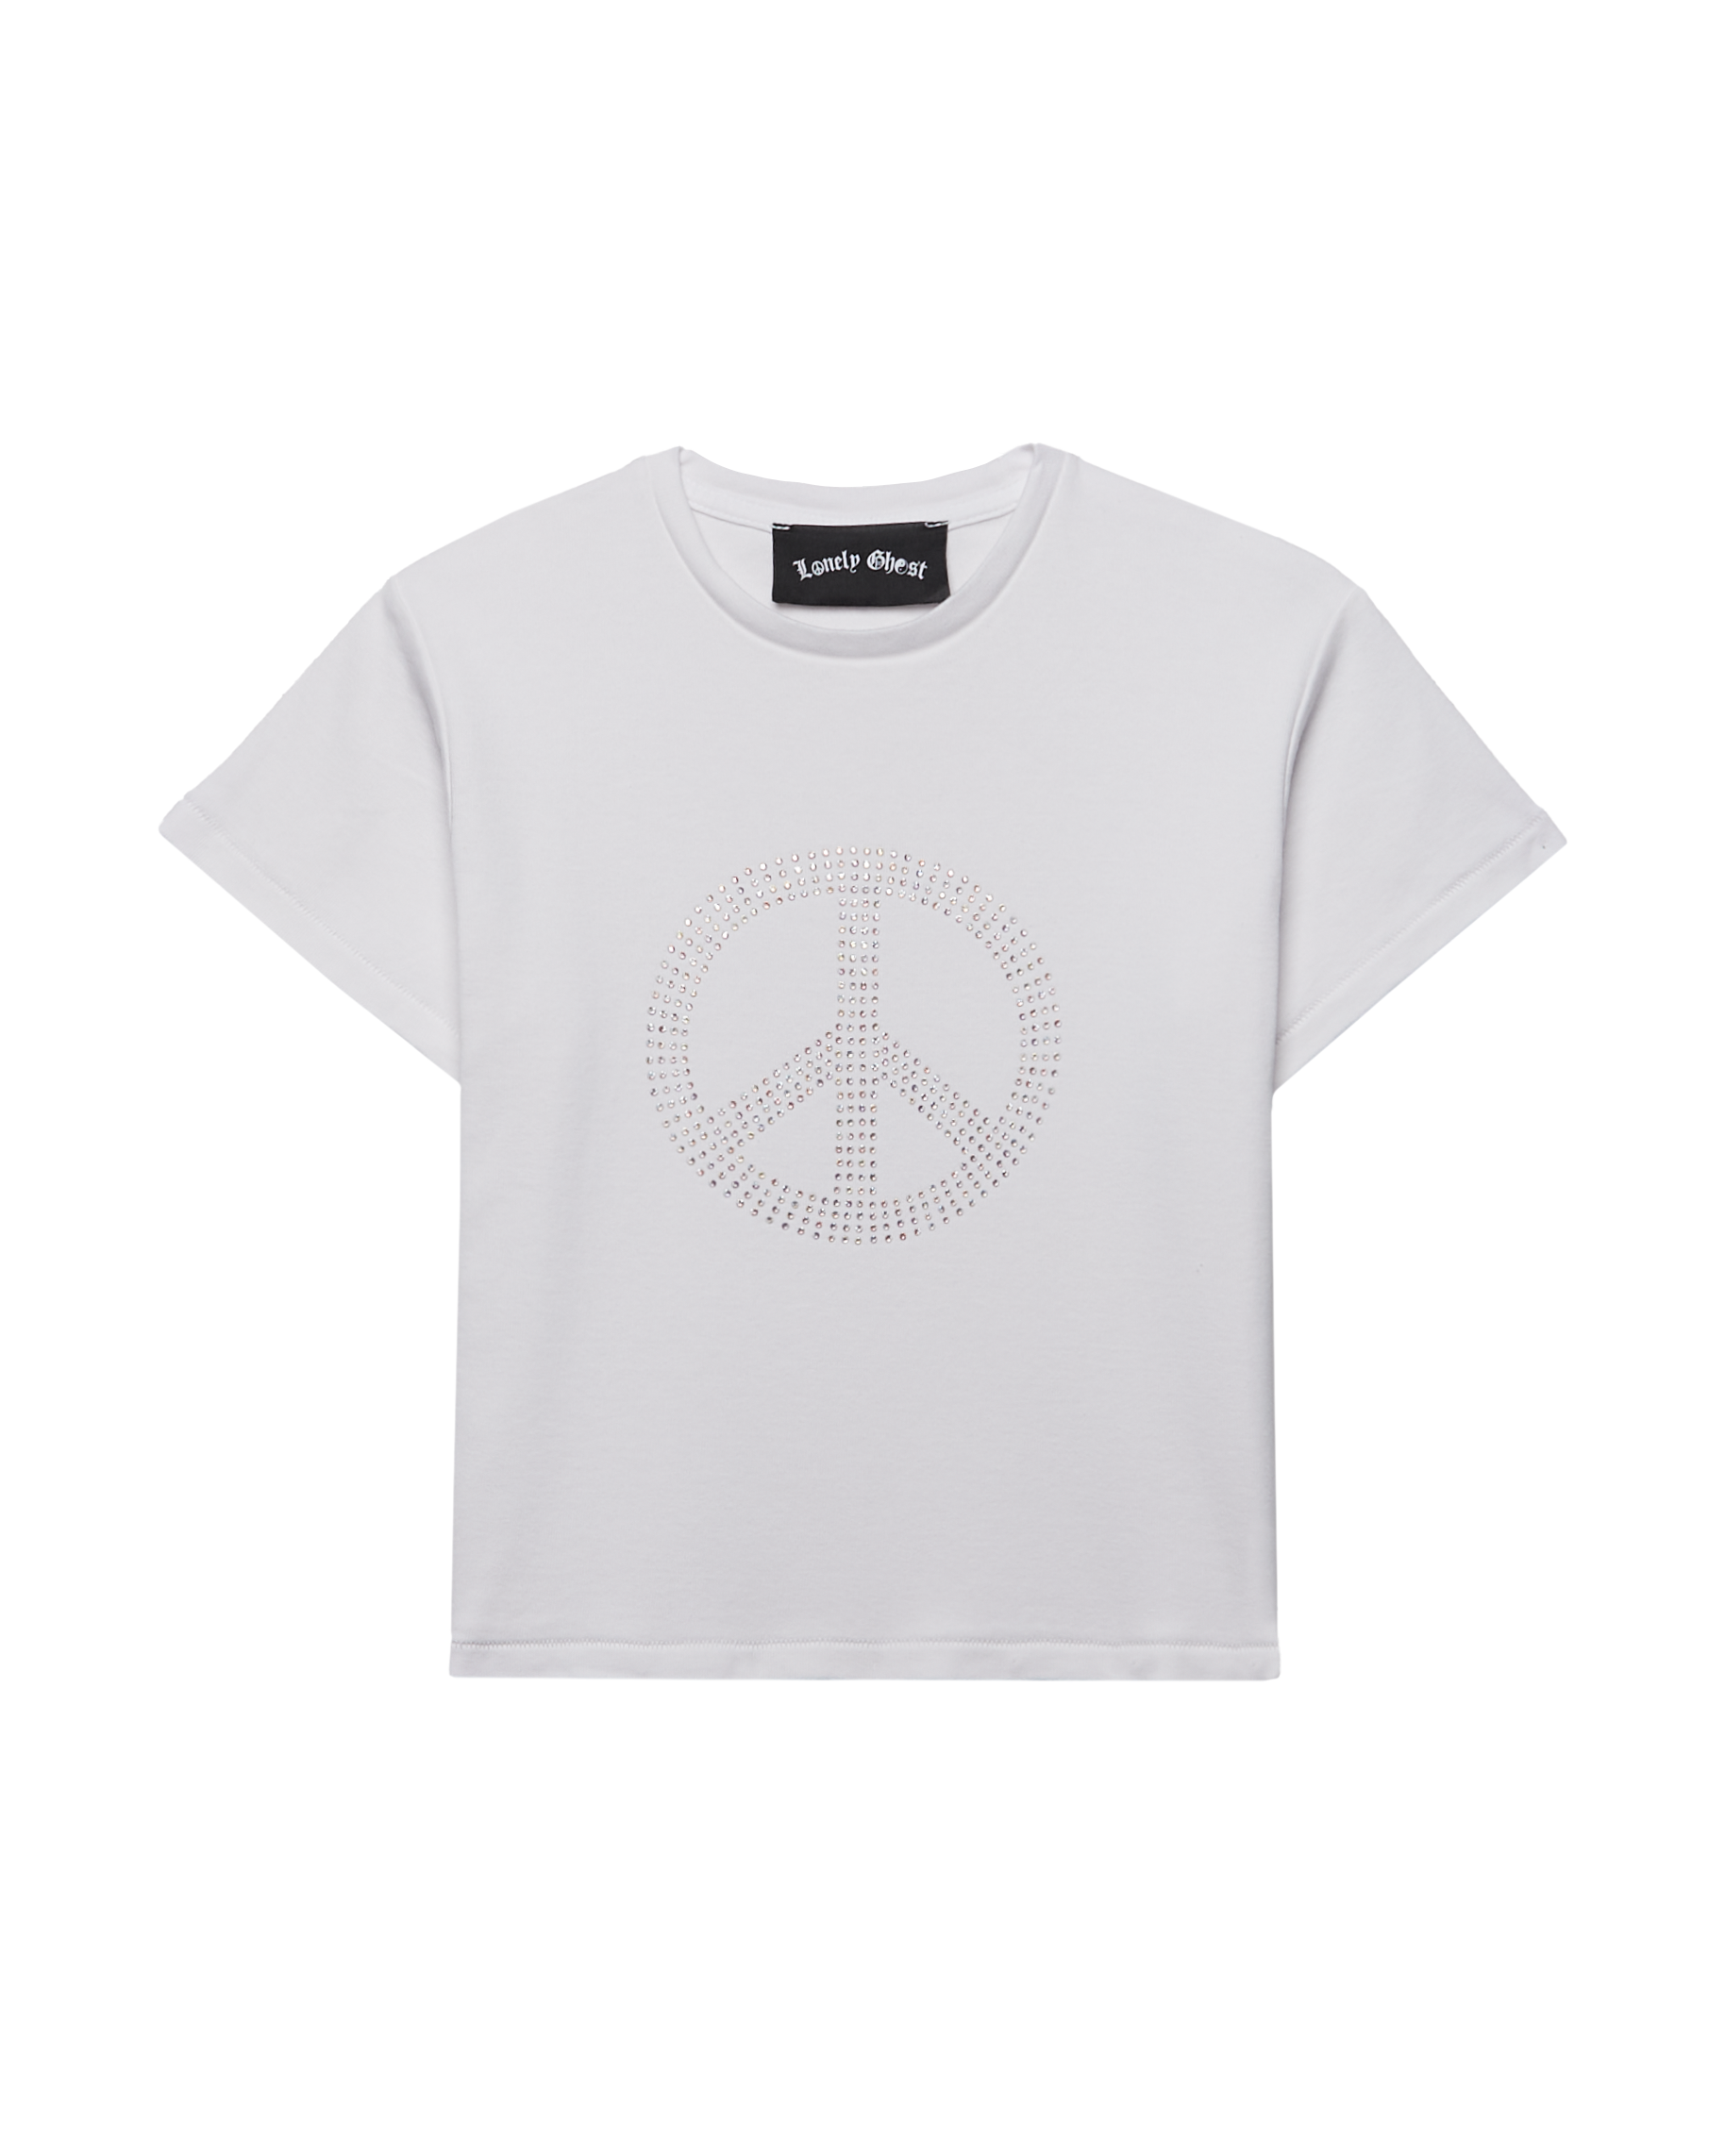 Peace Bedazzle Baby Tee